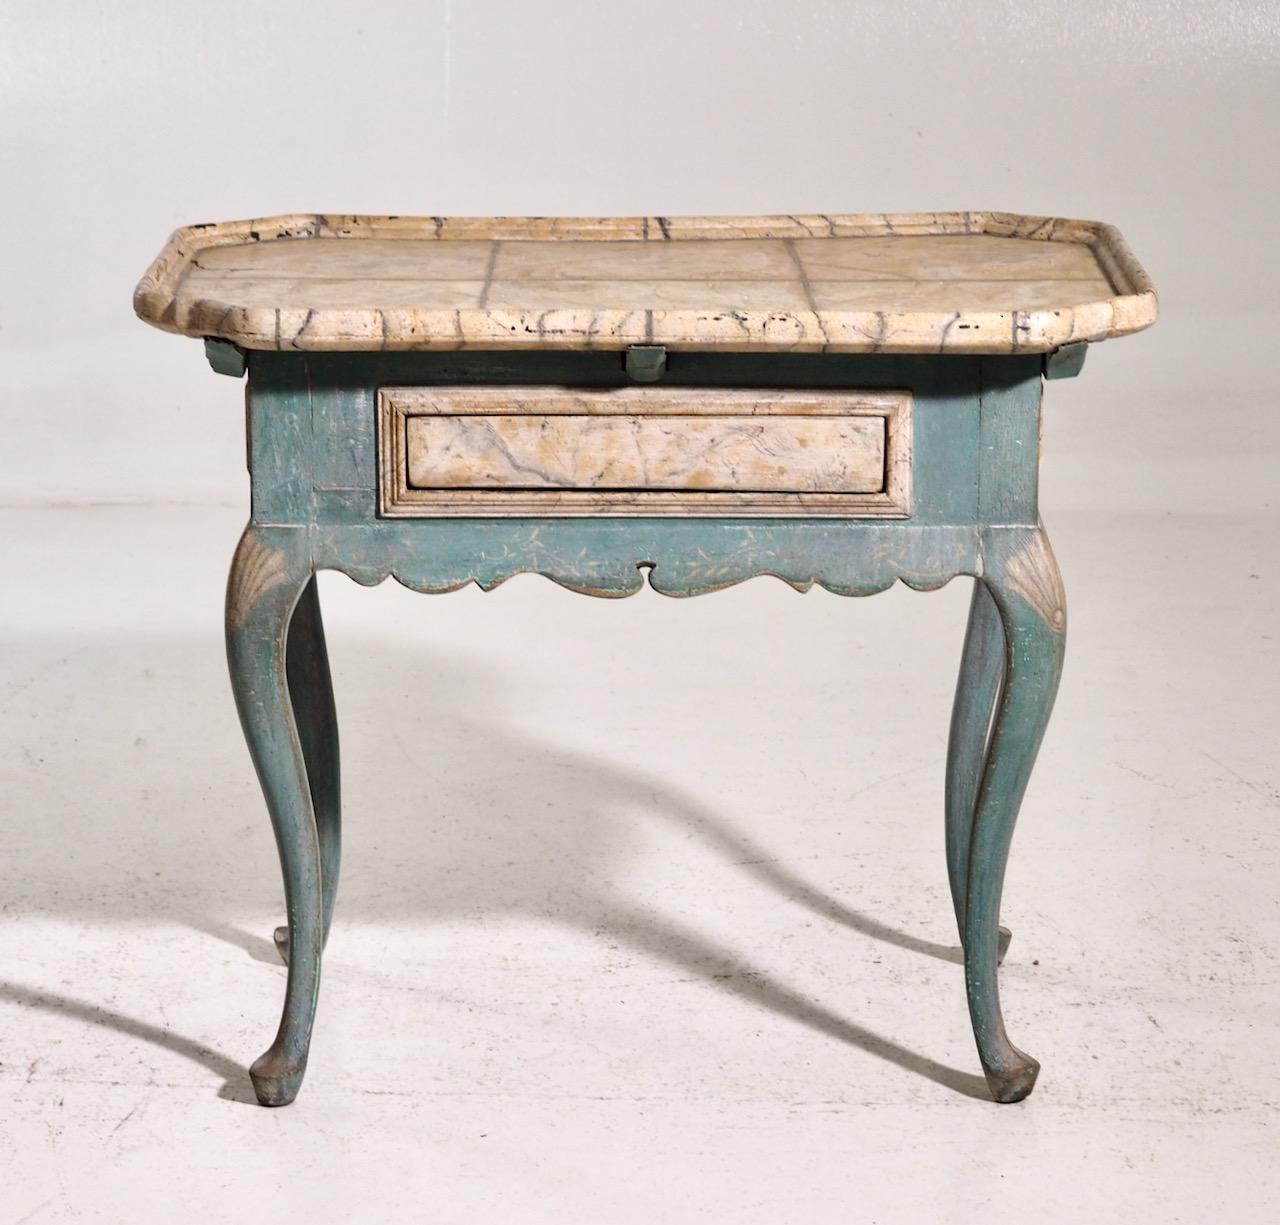 Rare Scandinavian Rococo table in old paint and faux painted marble top, circa 1750.